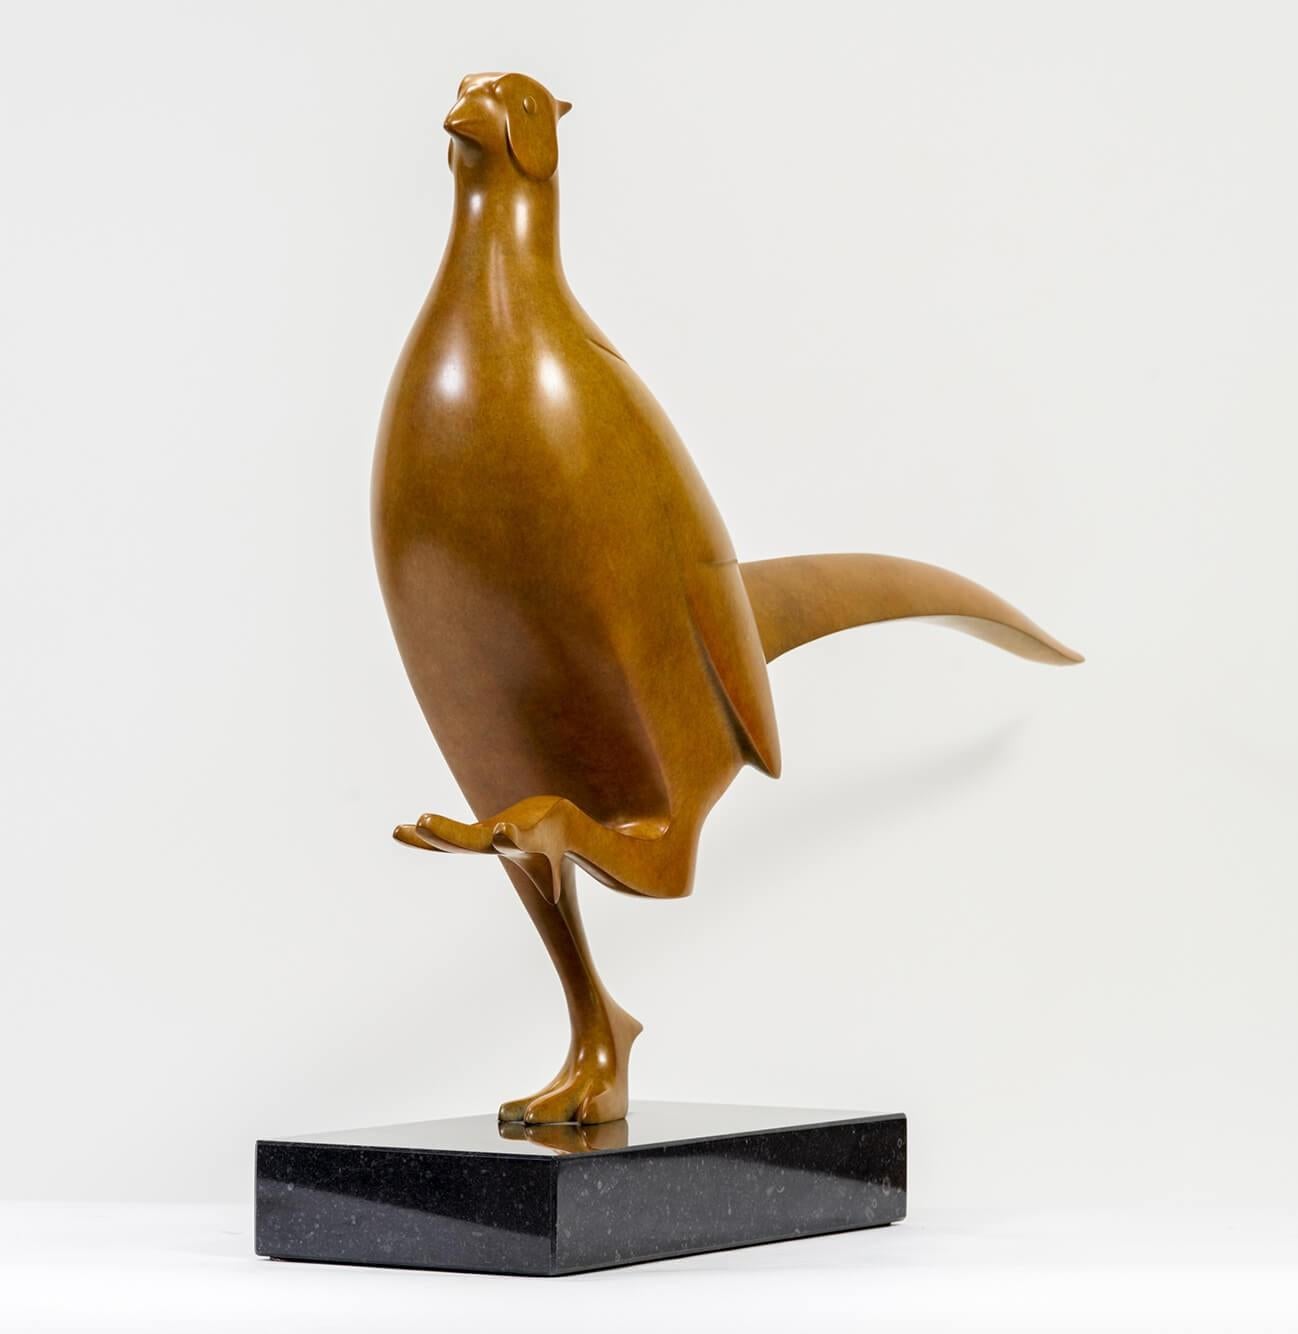 Fazant no. 8 (Pheasant) Bird Animal Bronze Sculpture Brown Limited Edition

Evert den Hartog (born in Groot-Ammers, The Netherlands in 1949) followed his education to be a sculptor at the Rotterdam Academy of Visual Arts. In the years 1971-1976 his